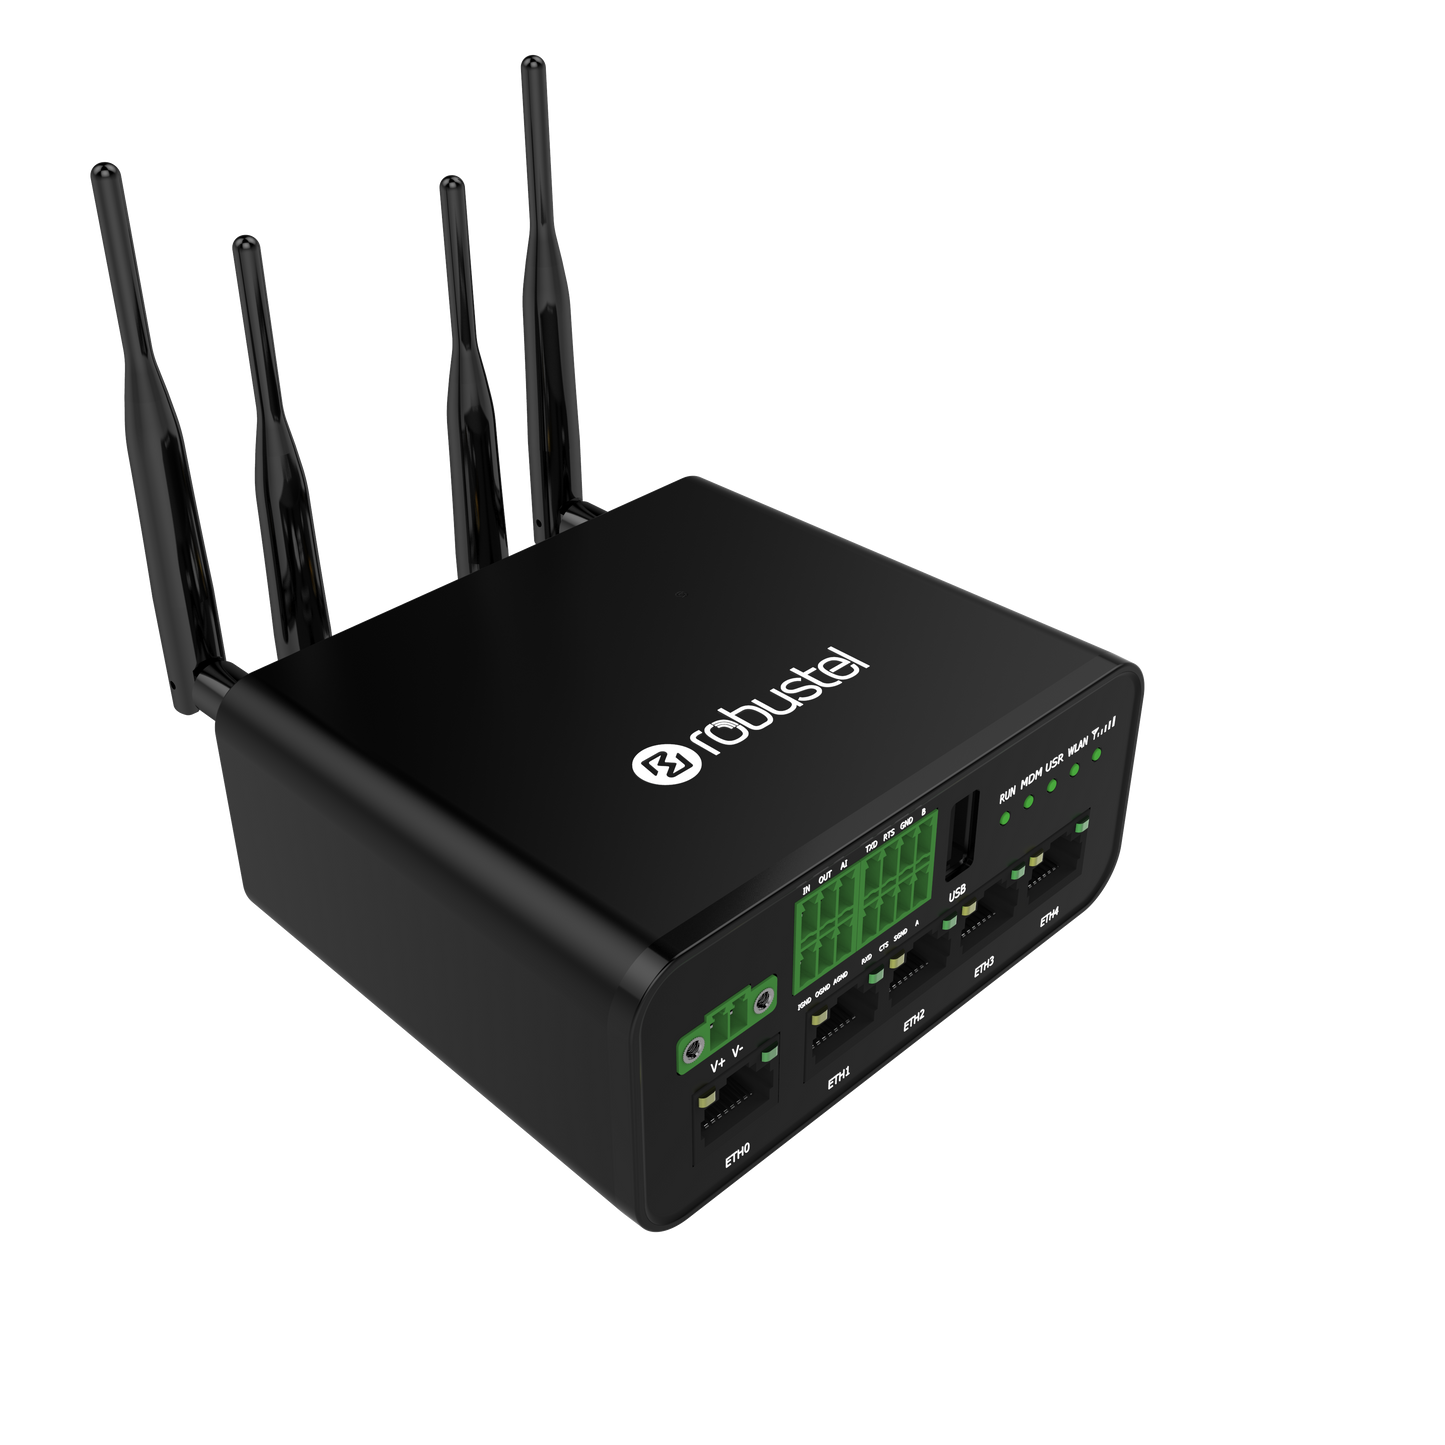 Robustel R1520-4L Global IoT Router